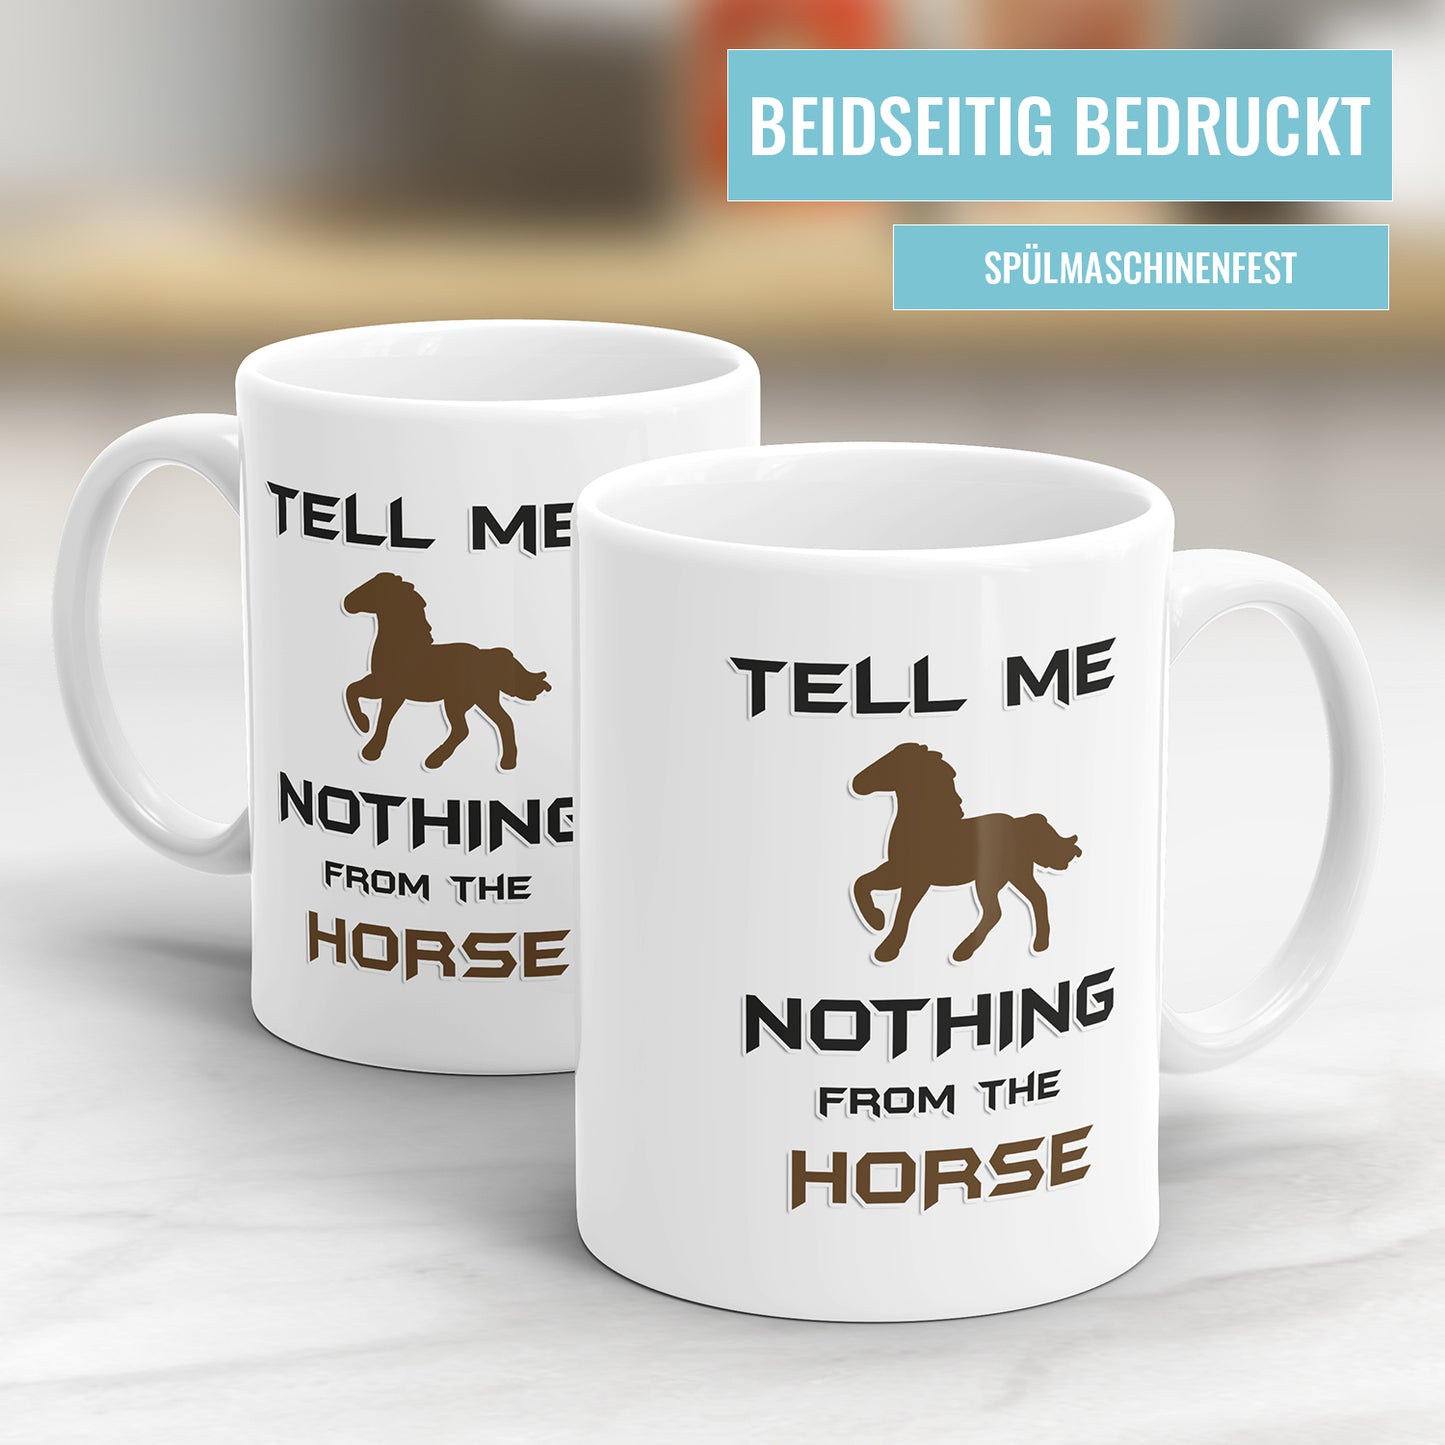 Tell me nothing from the Horse Tasse mit Spruch Denglish